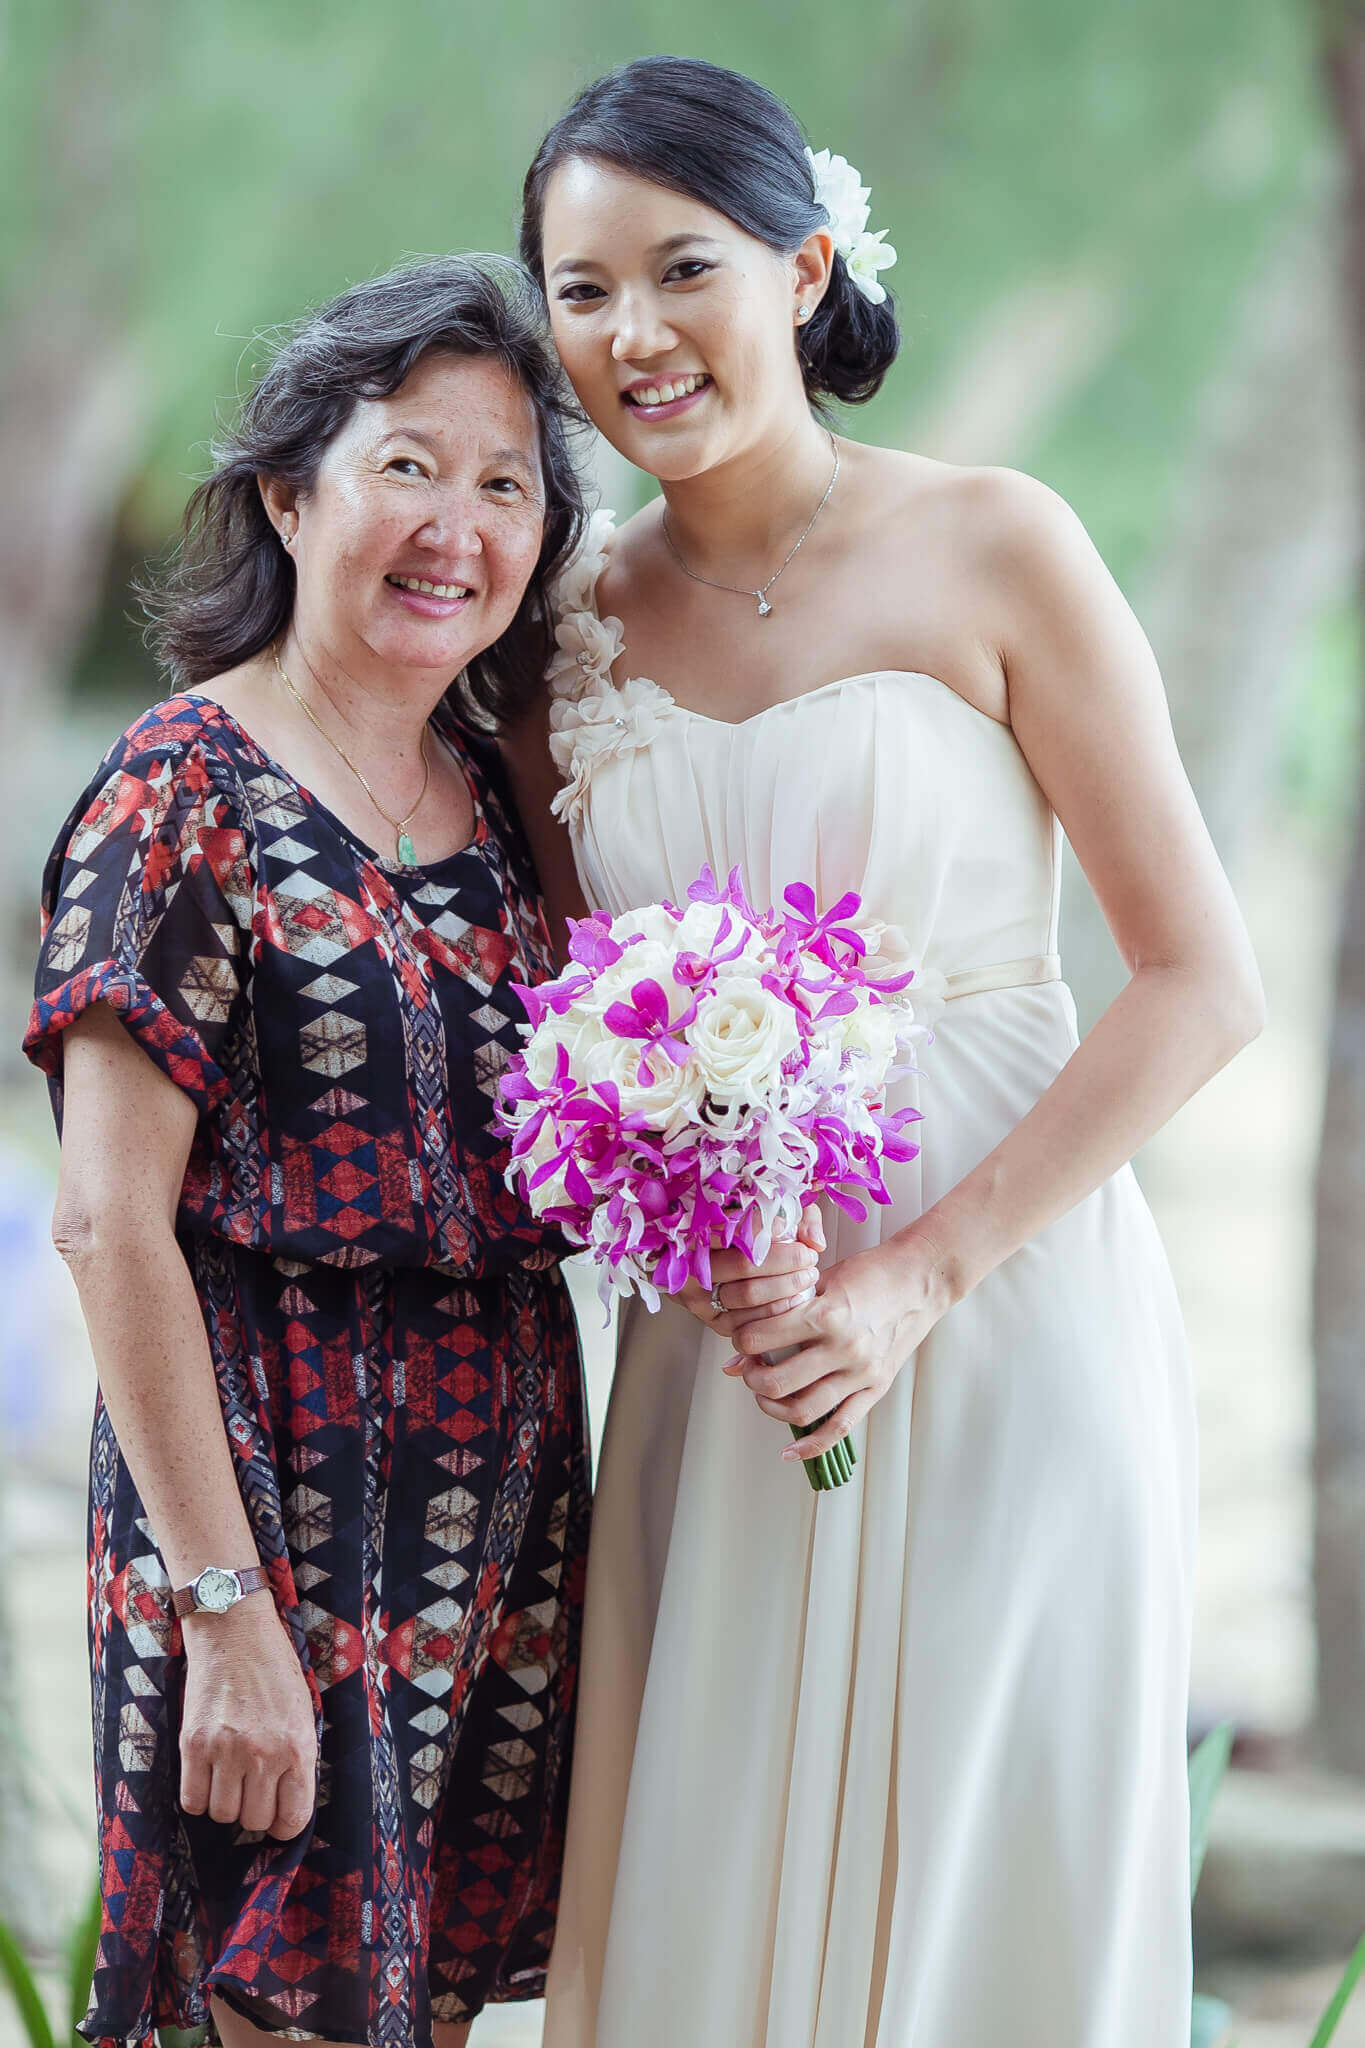 Bride and Mother - Bride and Groom Wedding Photography Wedding Planners Phuket Thailand